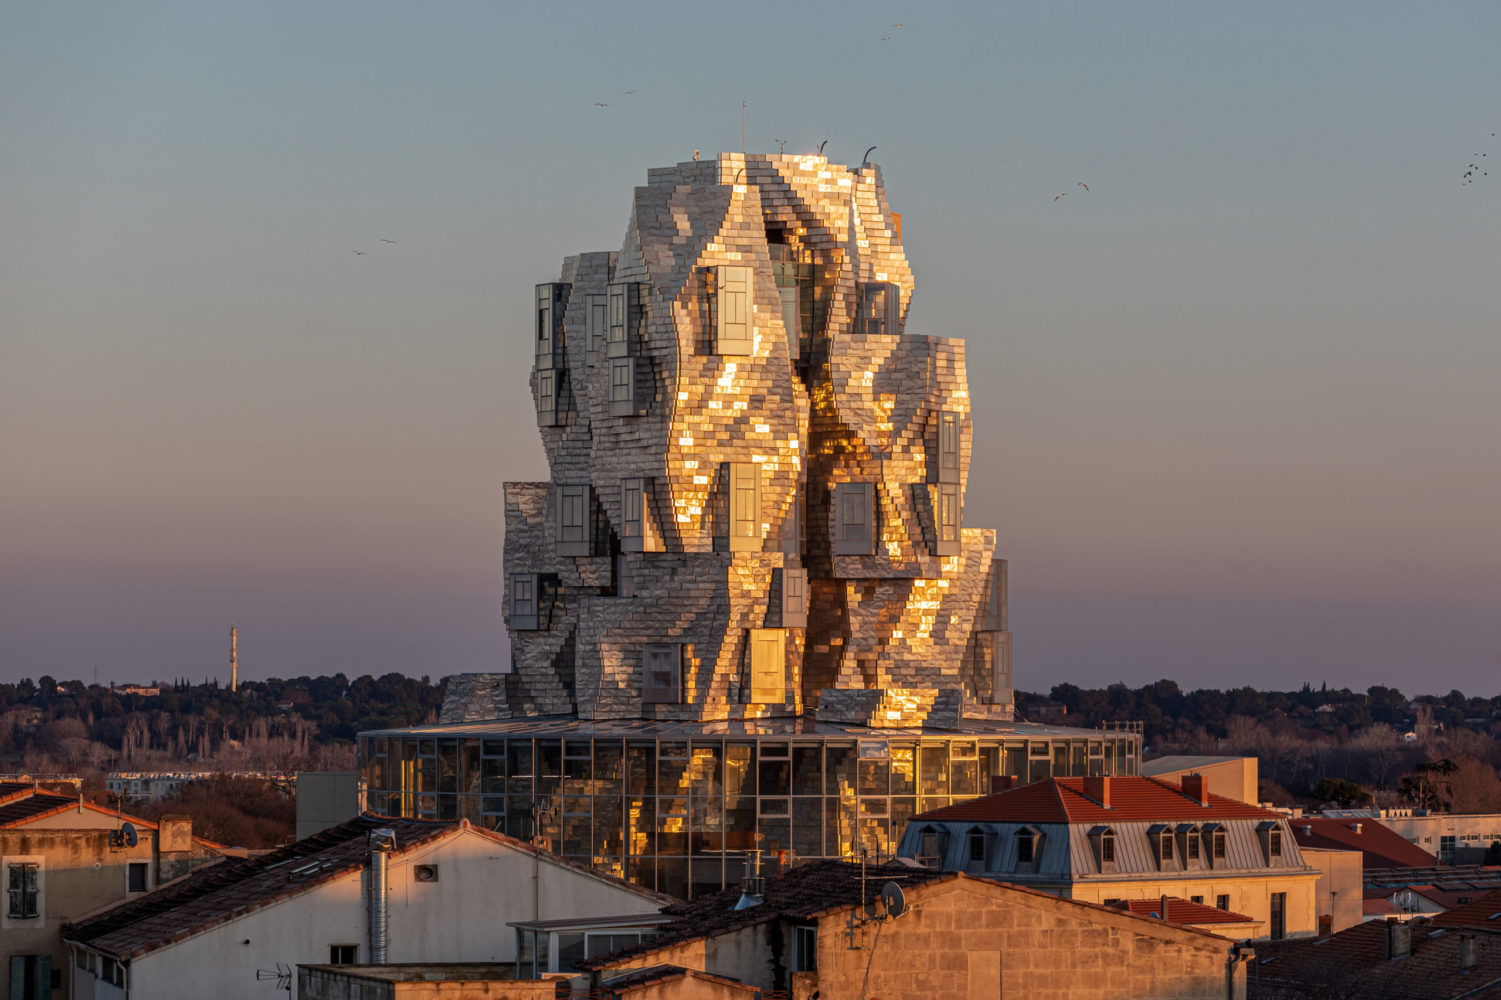 Luma Tower imagined by Frank Gehry